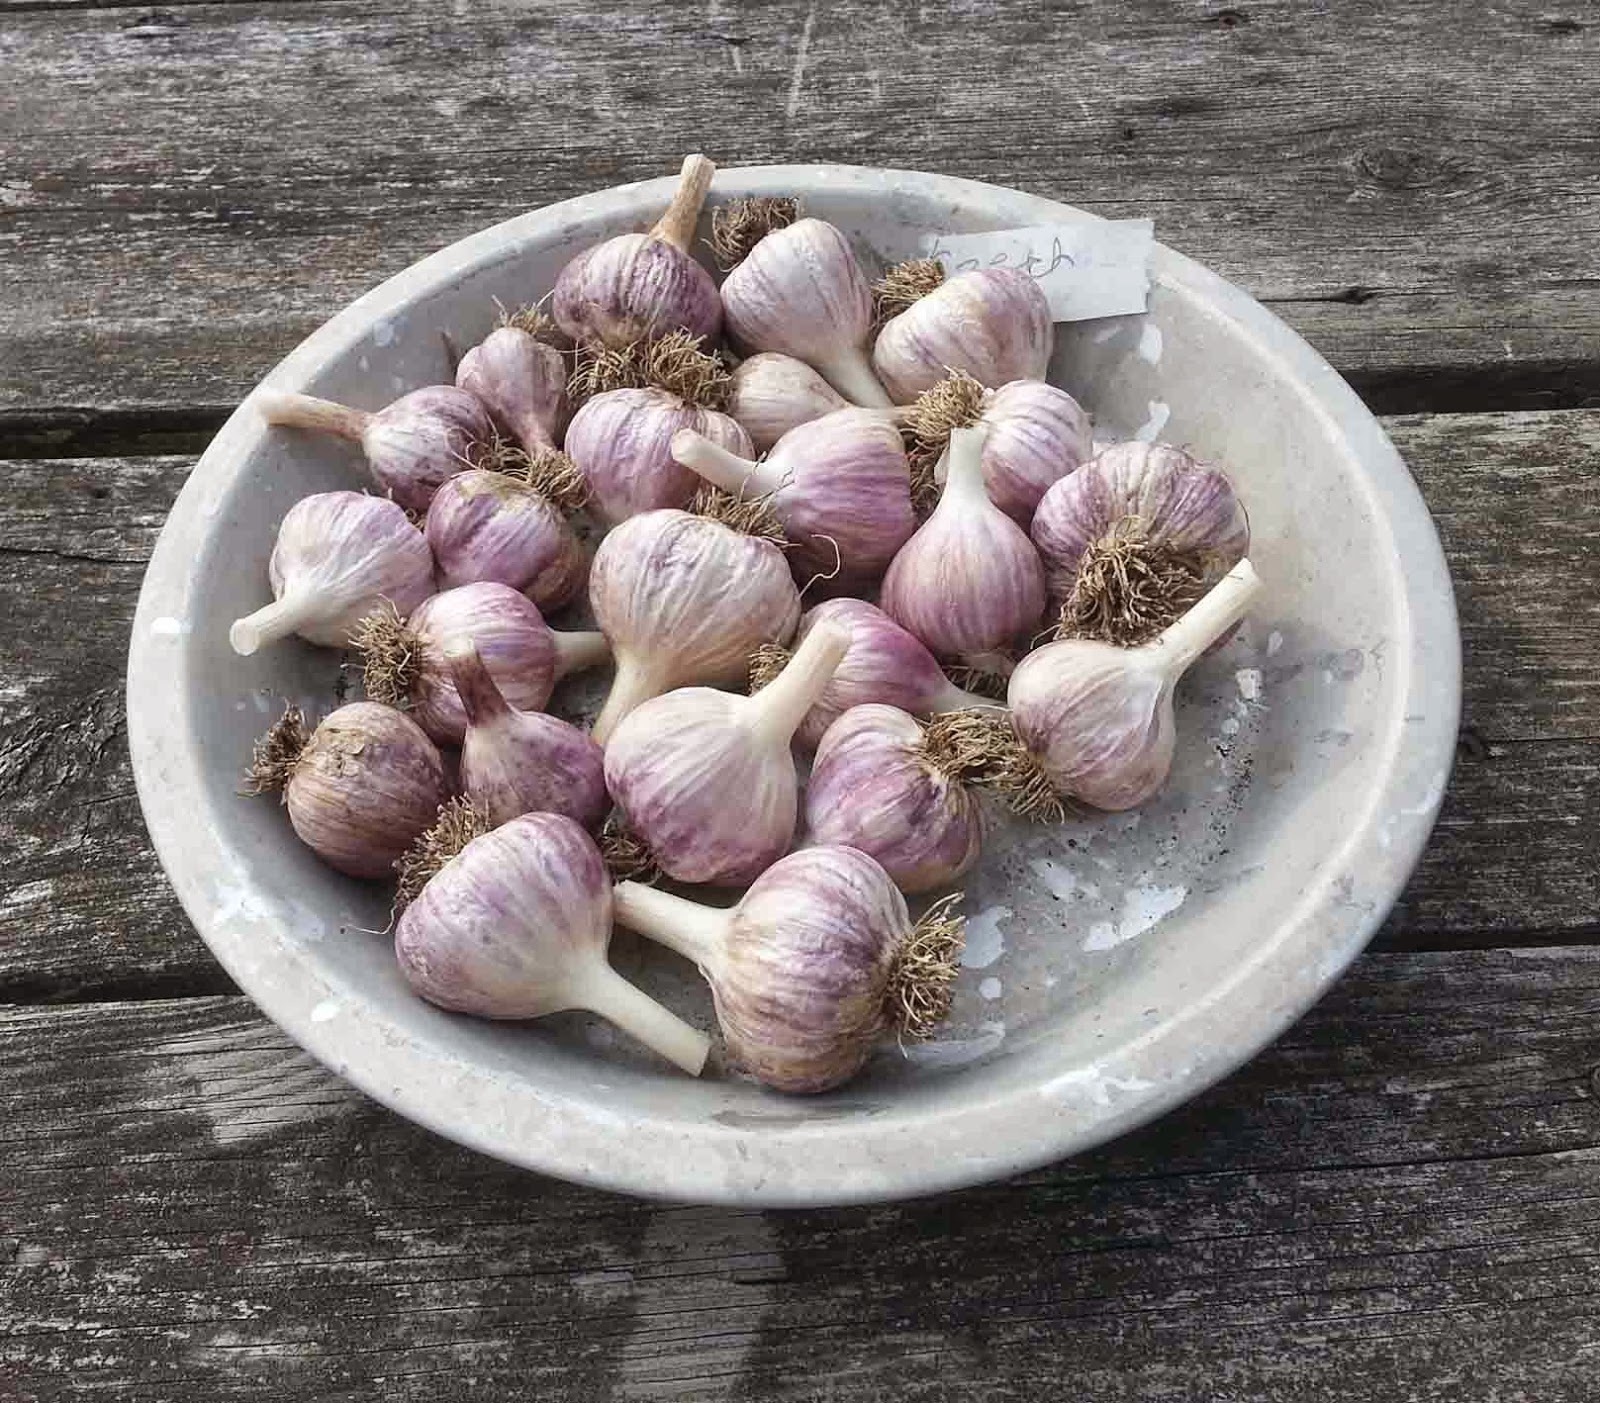 The Gardening Me: Garlic & Shallots 2014 - The Results